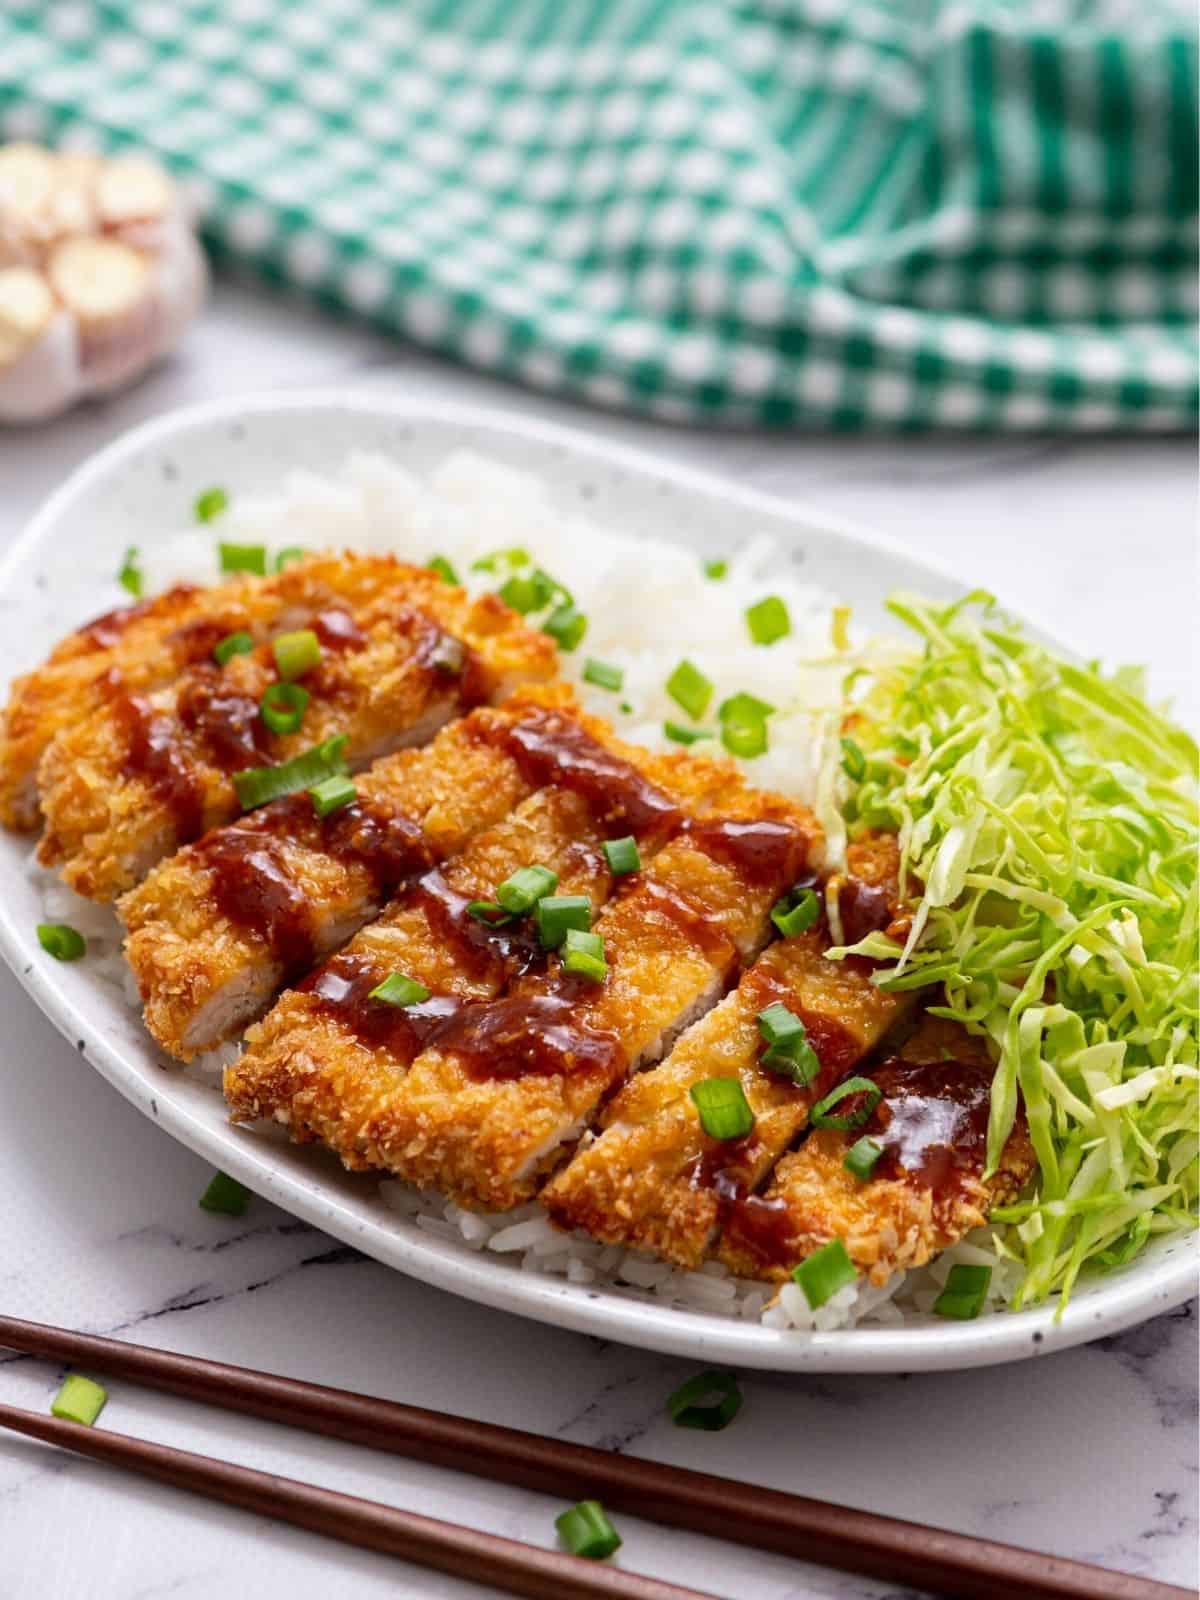 Sliced Chicken Katsu on plate served with rice and shredded cabbage.